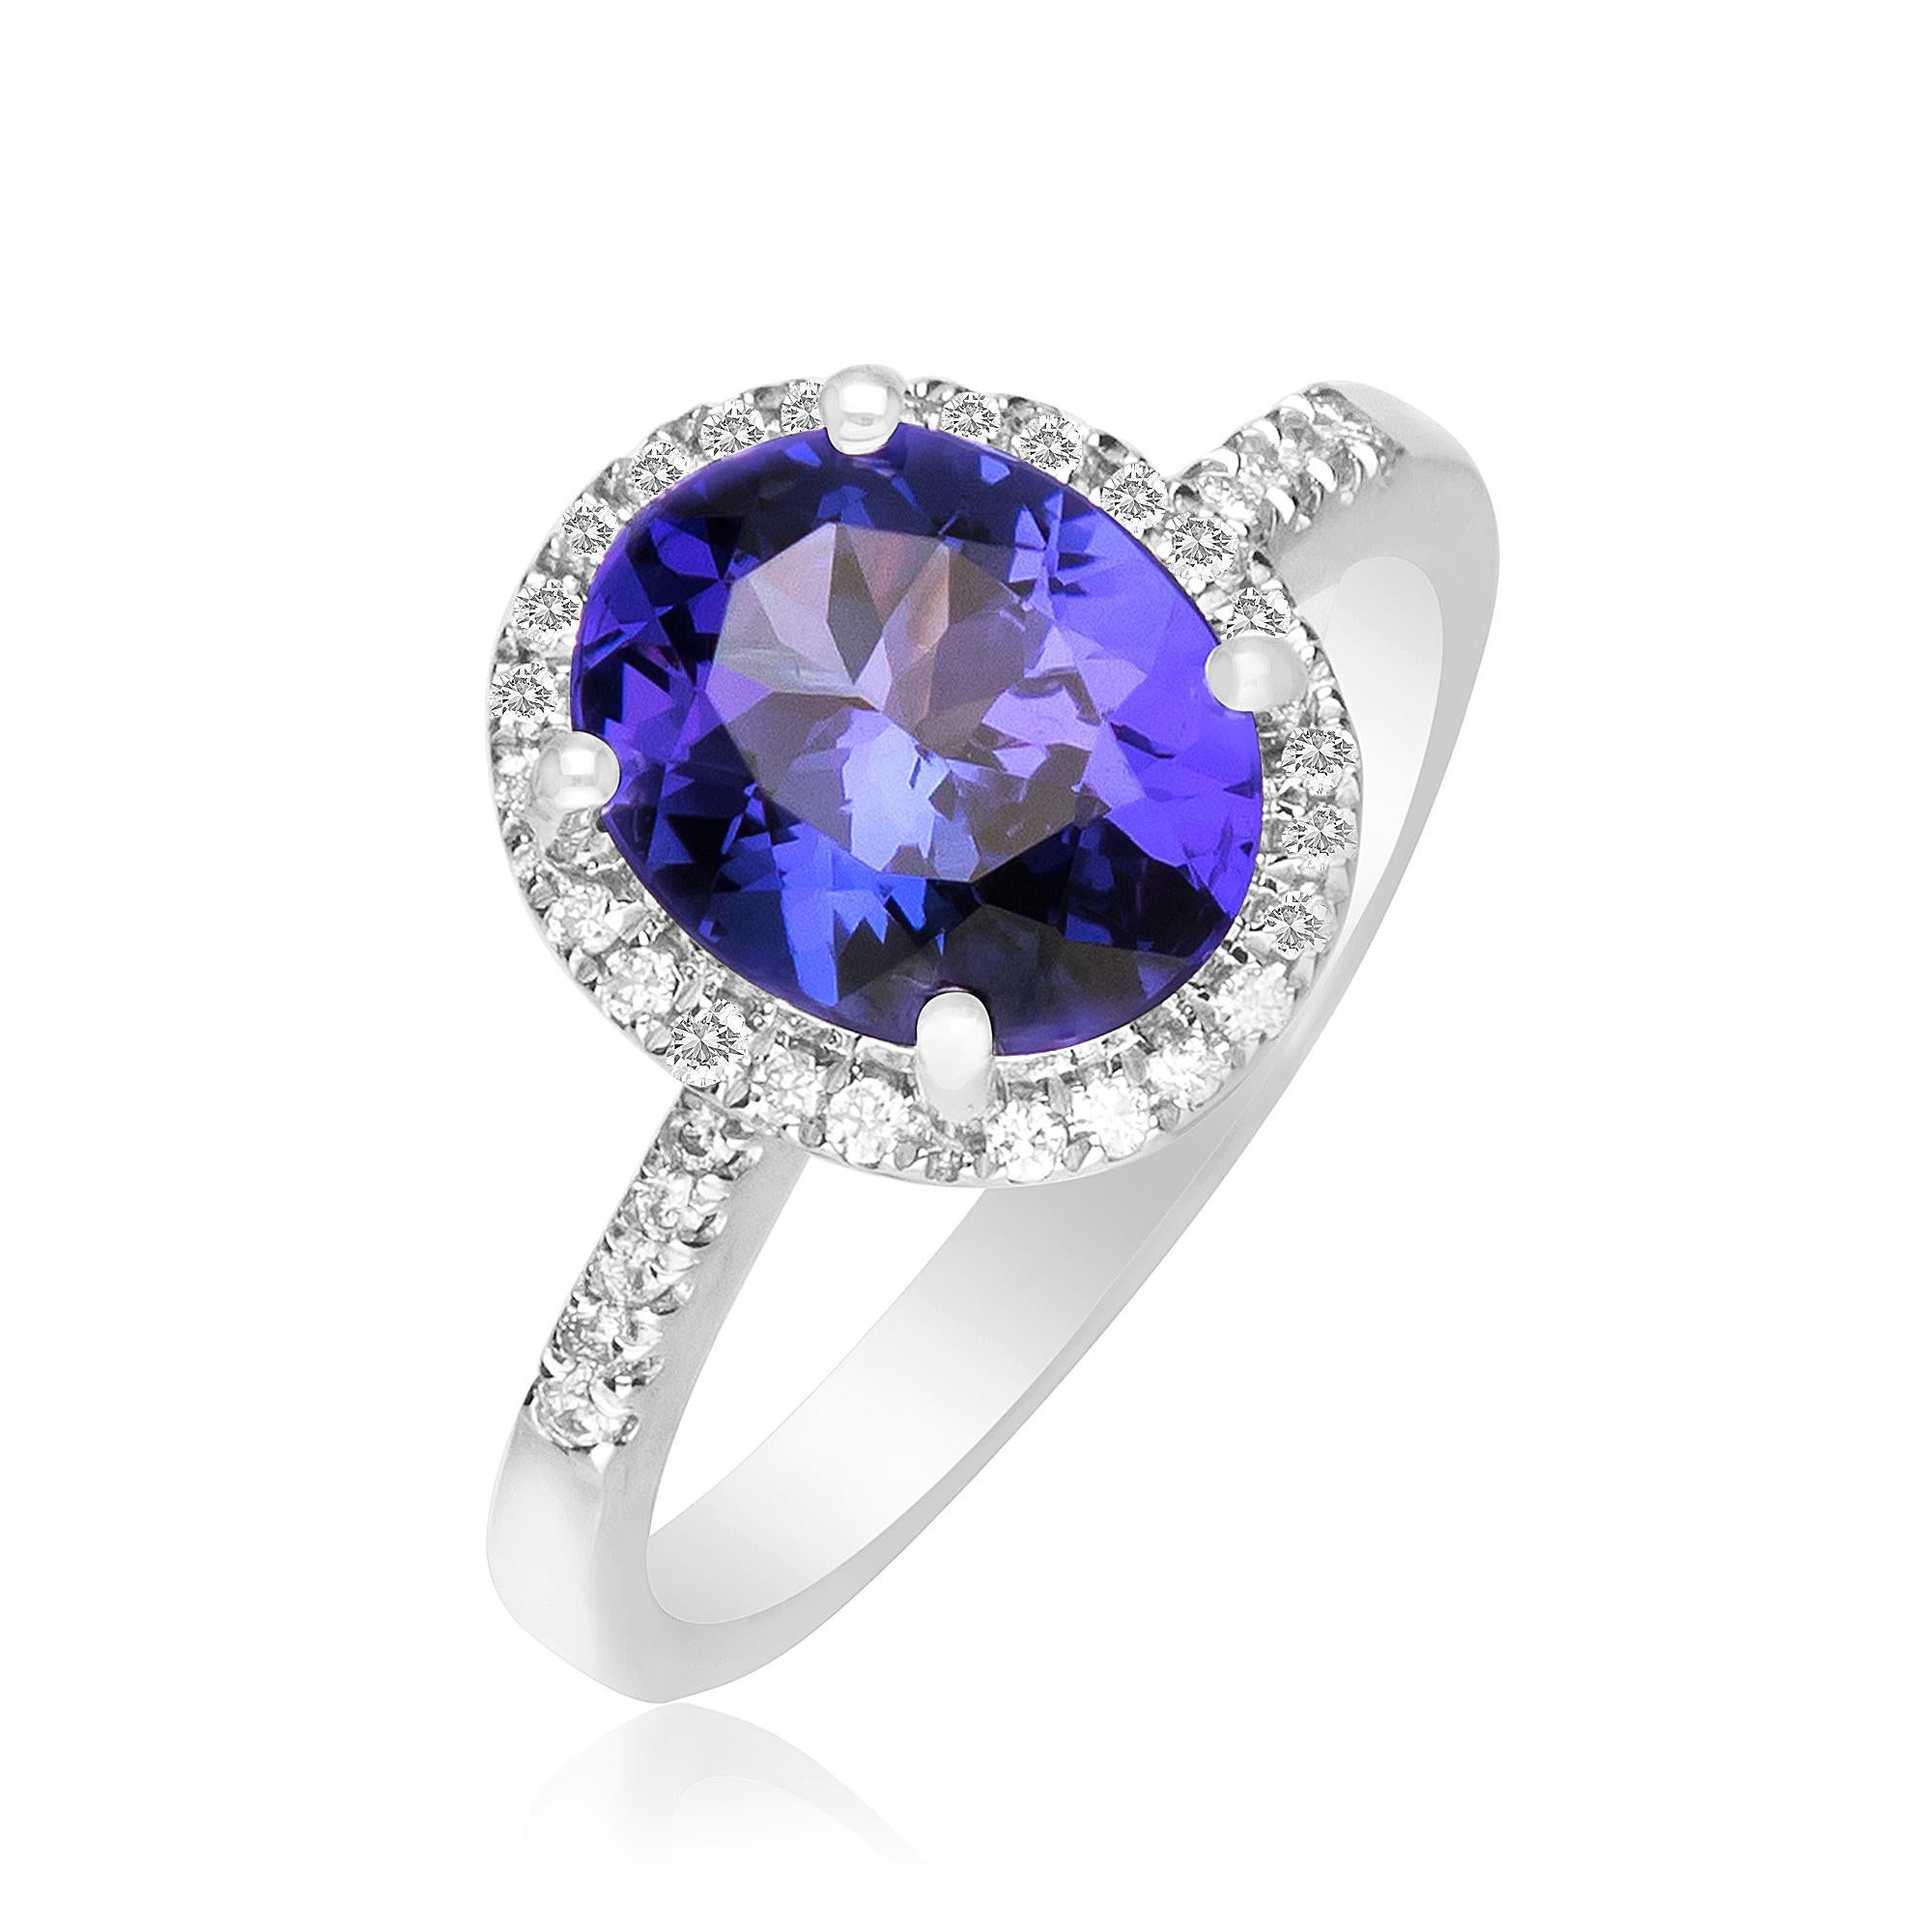 This elegant engagement ring is crafted in 14-karat White gold. It features an oval cut 2.42 Carat Tanzanite 8x10 mm and 40 Round Diamonds 1/5 Ct. GH SI2 quality in a prong-setting. This ring comes in size 7 and is a perfect gift either for yourself